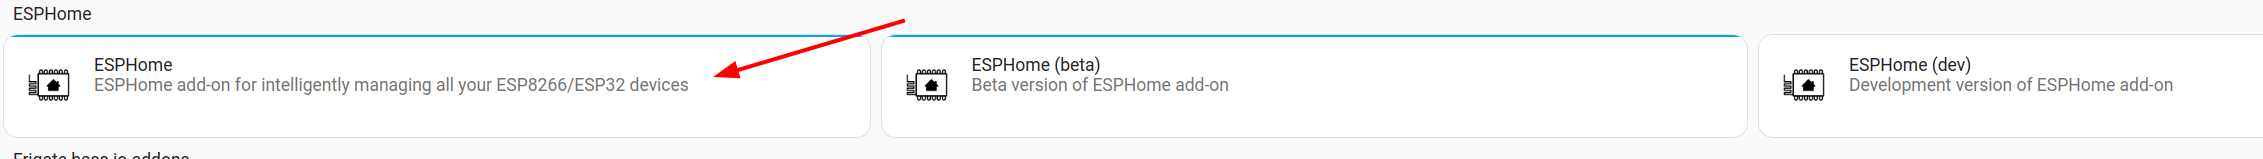 Esphome section